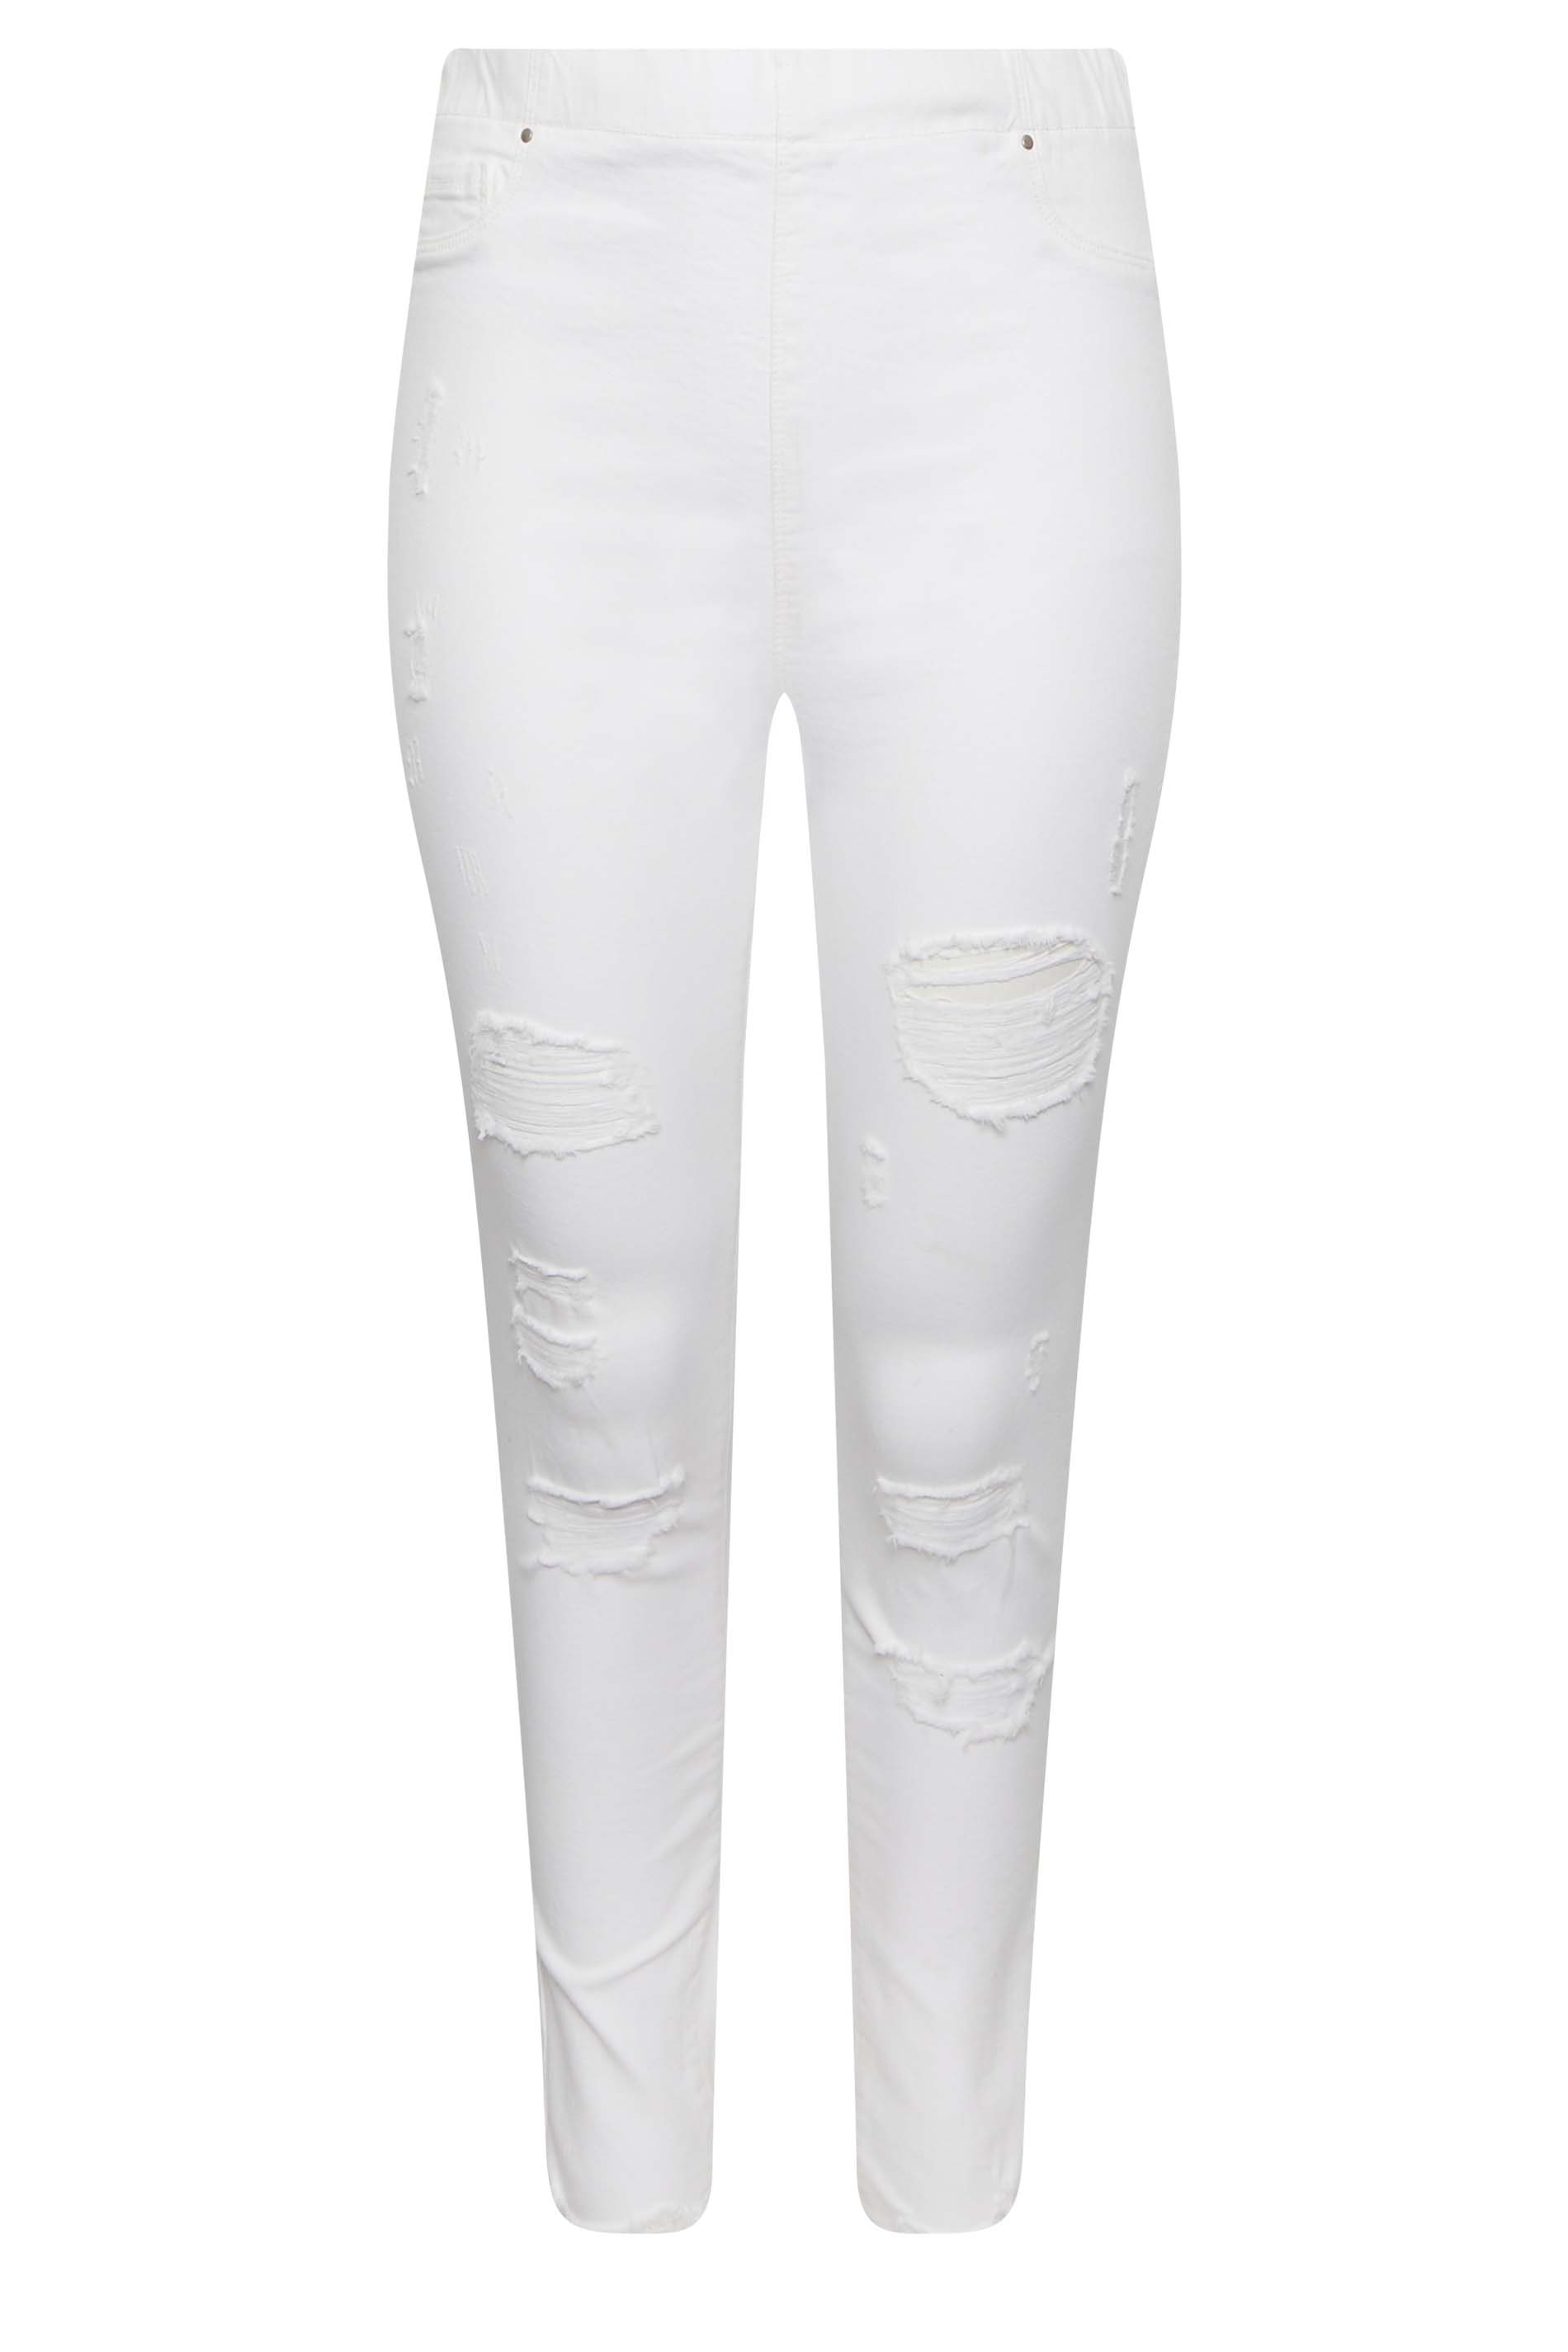 YOURS Plus Size White Stretch Extreme Ripped JENNY Jeggings